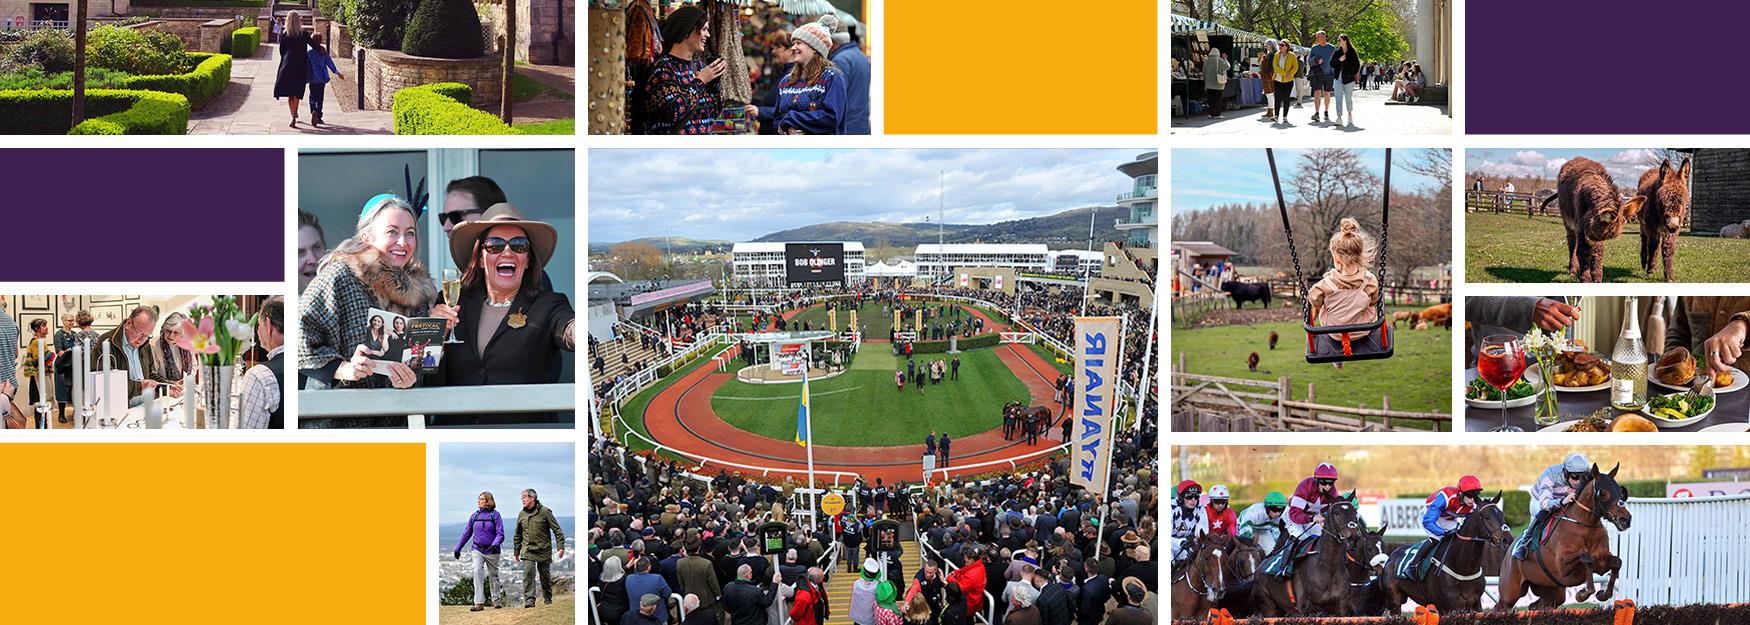 A montage of images of Cheltenham in March